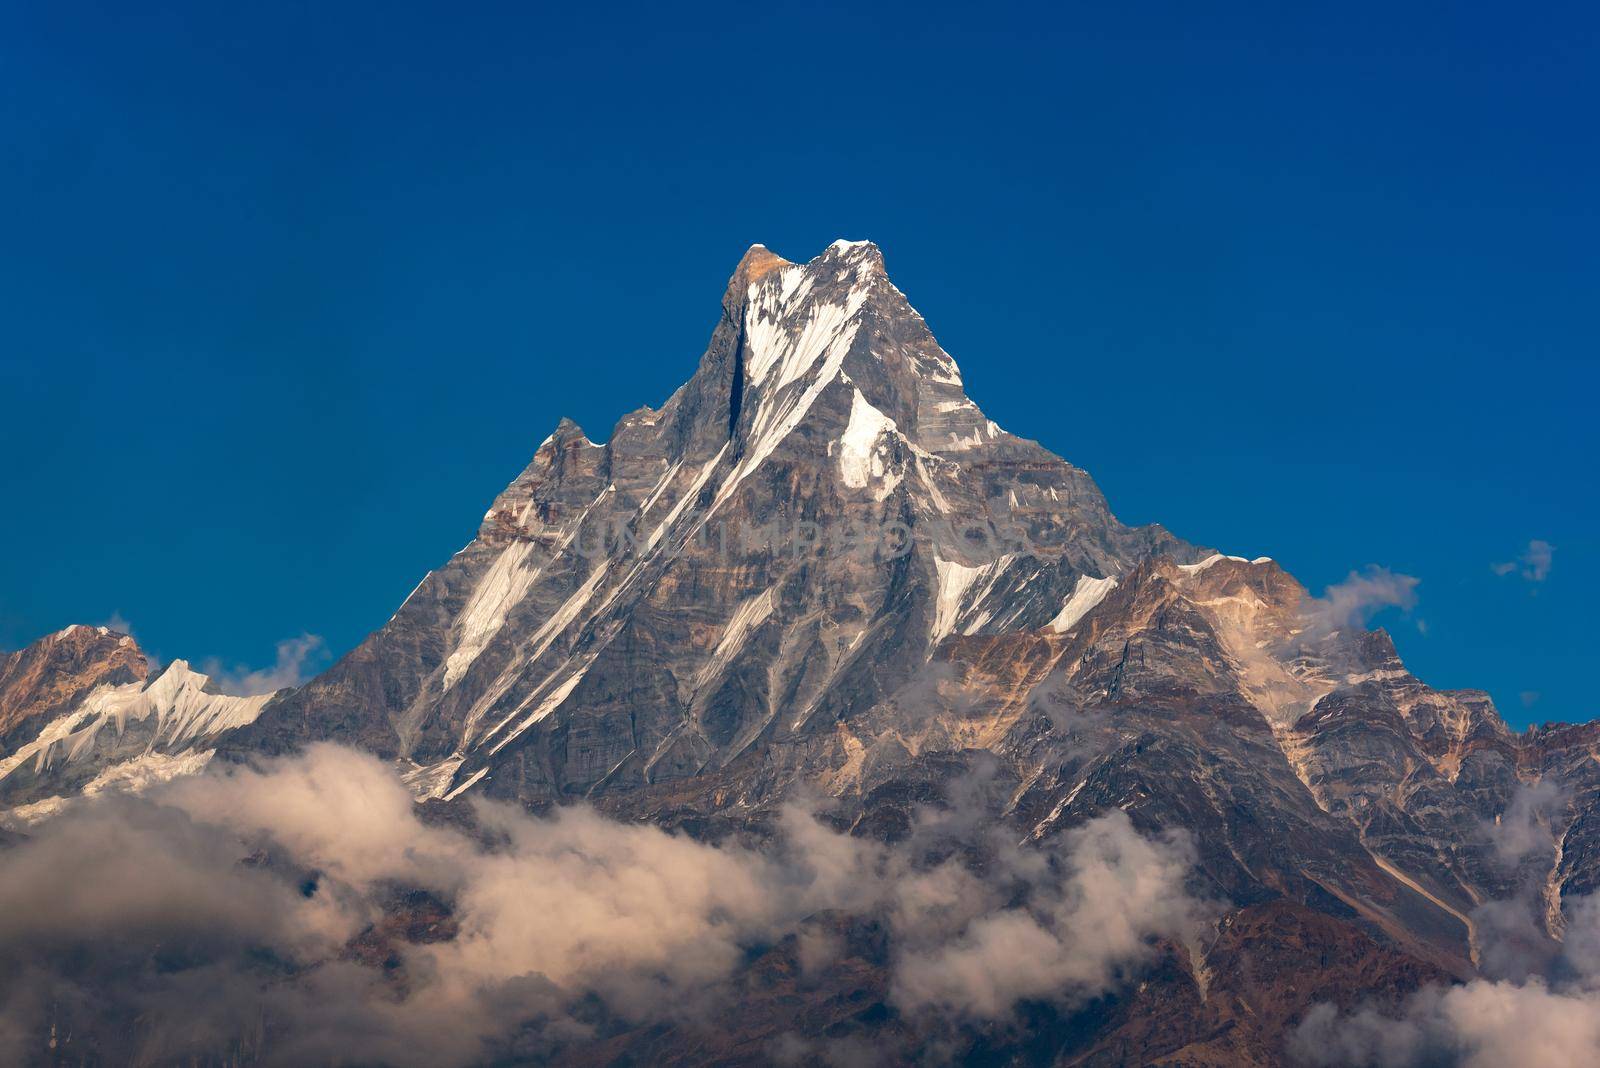 Fishtail peak or Machapuchare mountain with clear blue sky background at Nepal. by Nuamfolio